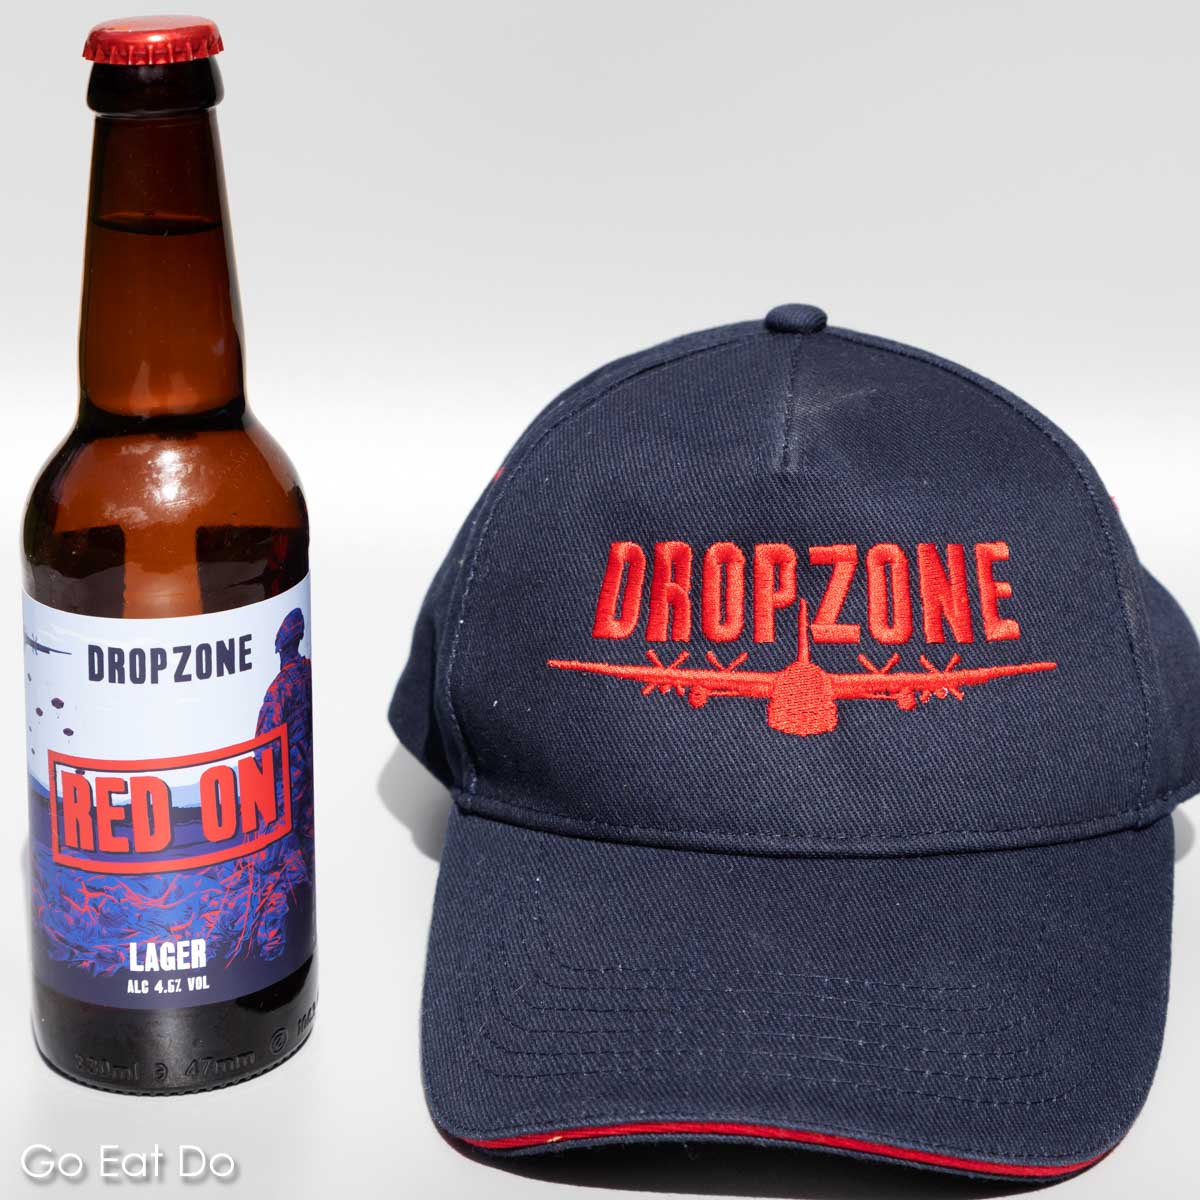 A bottle of DropZone Brewery's Red On beer next to a baseball cap.